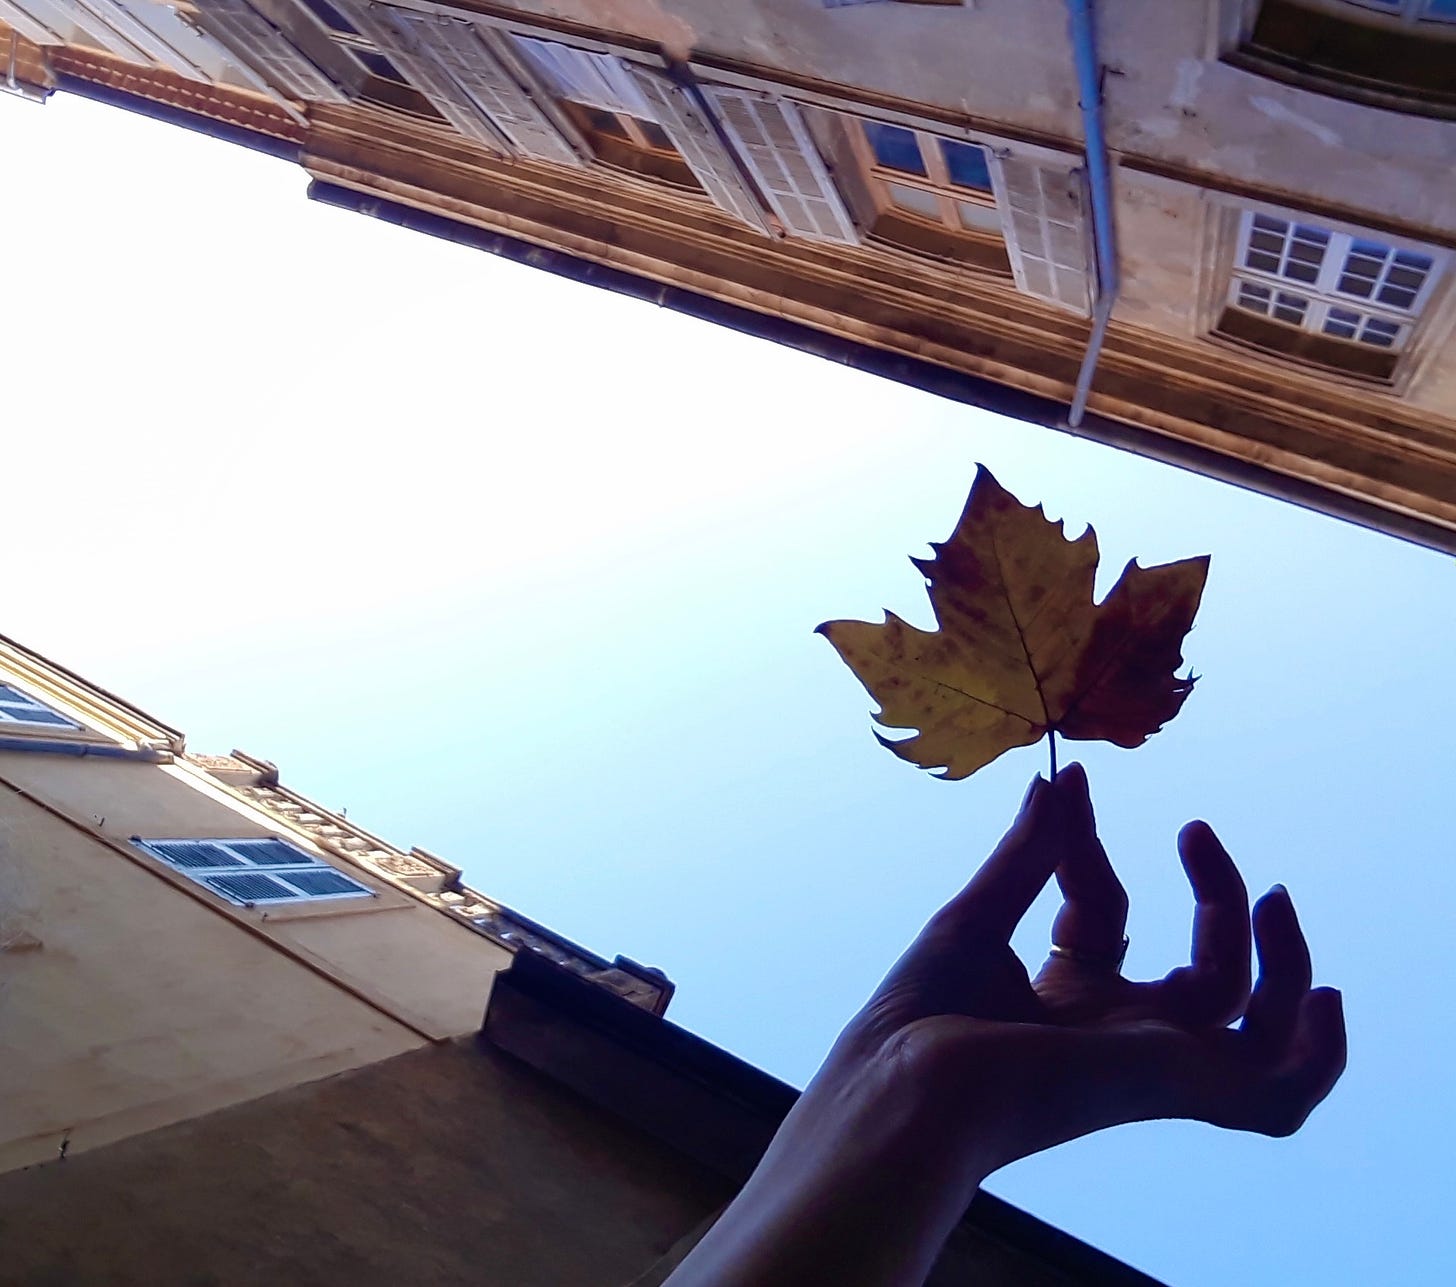 Image of a French town, warm yellow coloured buildings and a blue sky, taken from below. There is a silouette of a hand holding a three point leaf which cuts into the frame.